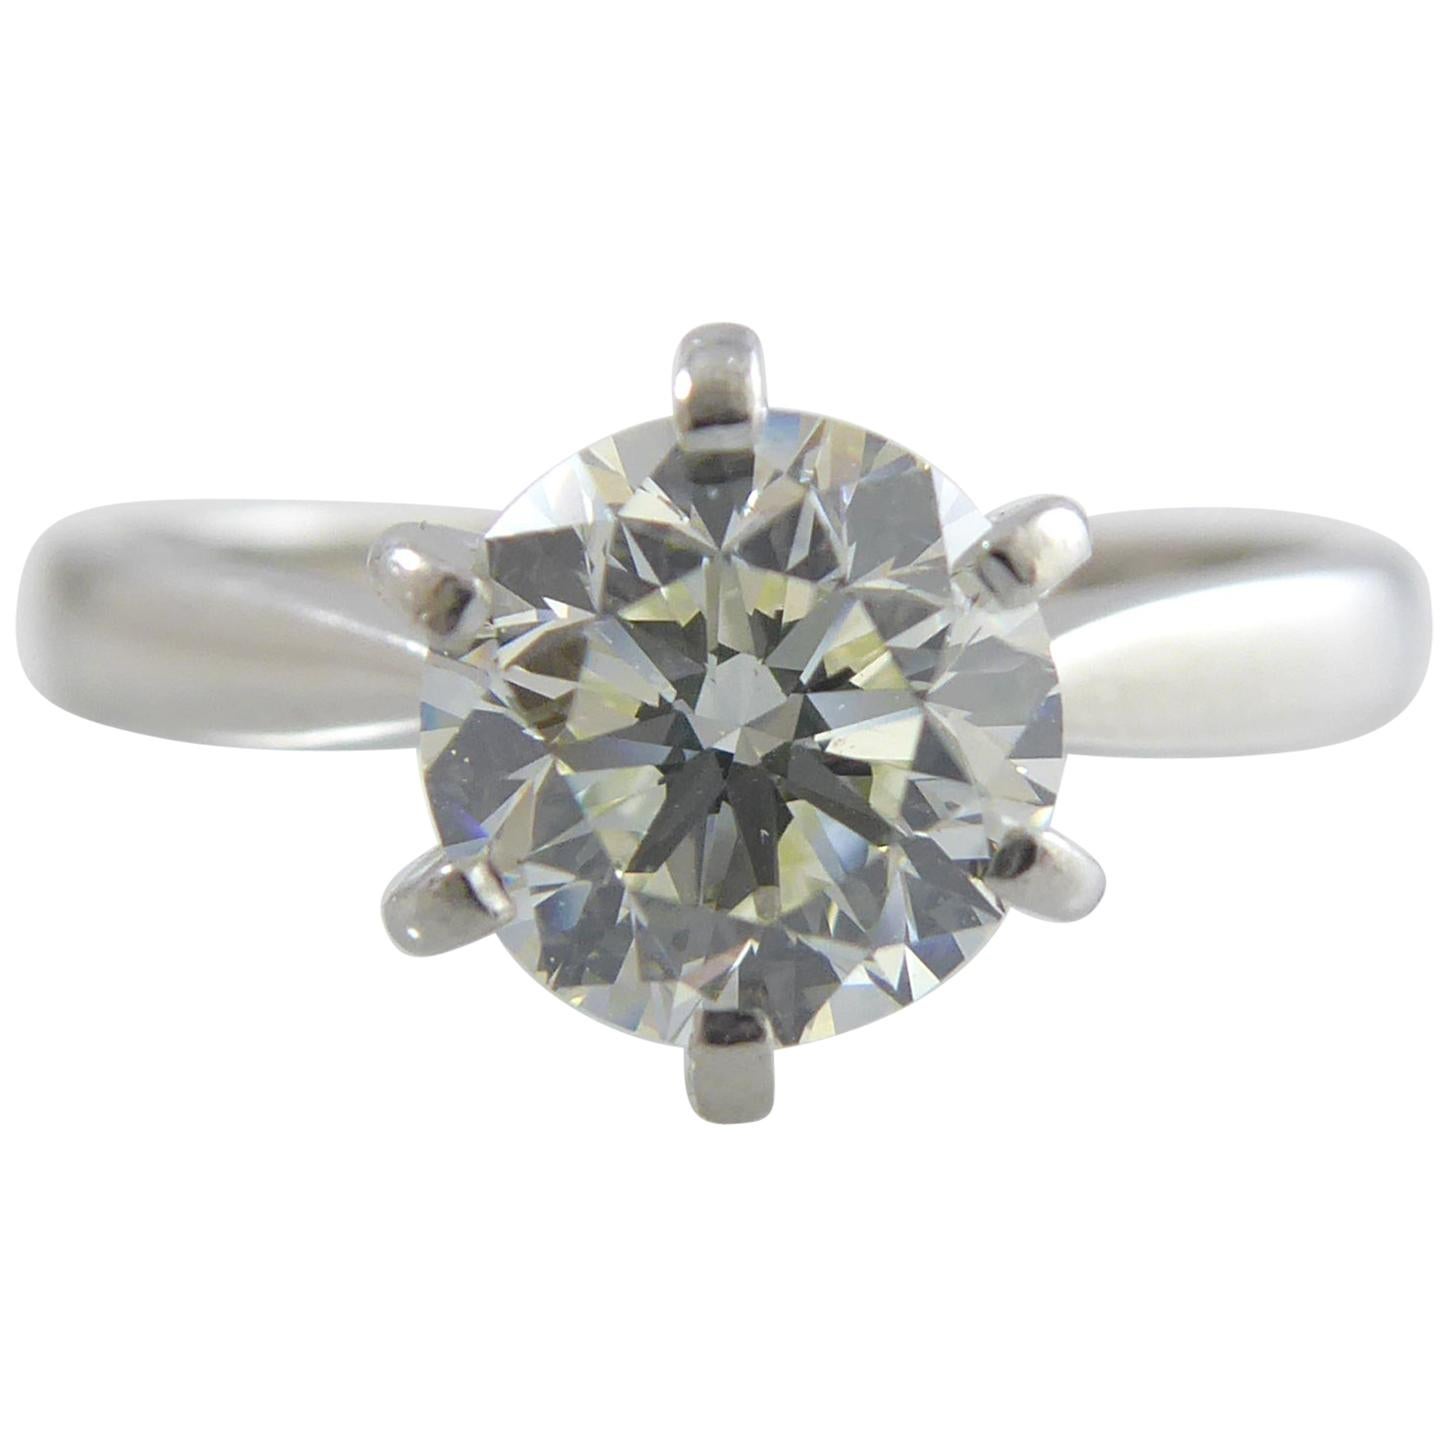 Certified 1.0 Carat Diamond Solitaire Ring, Platinum Setting and Band